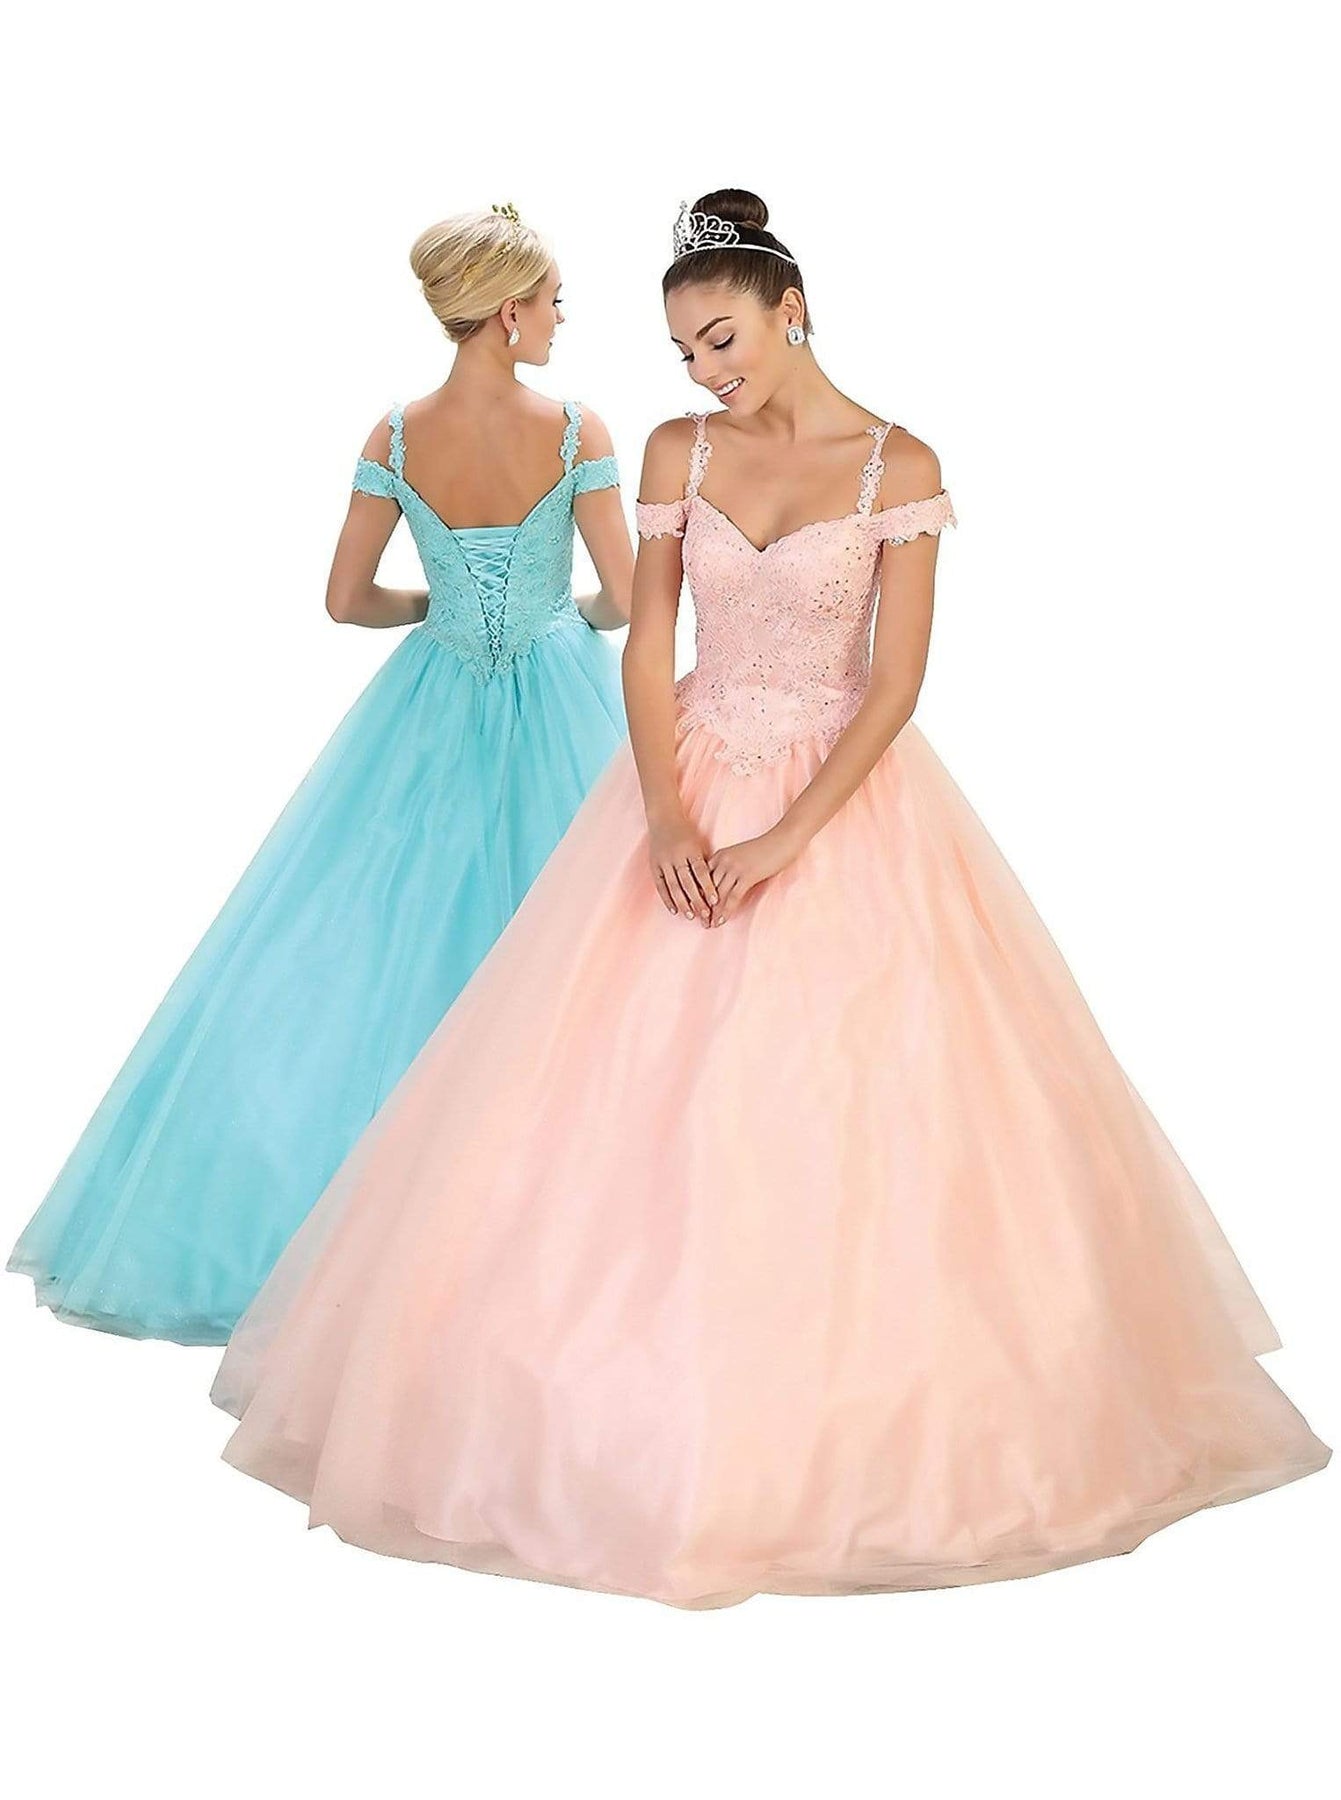 May Queen - Beaded Lace Sweetheart Quinceanera Ballgown Quinceanera Dresses 4 / Blush